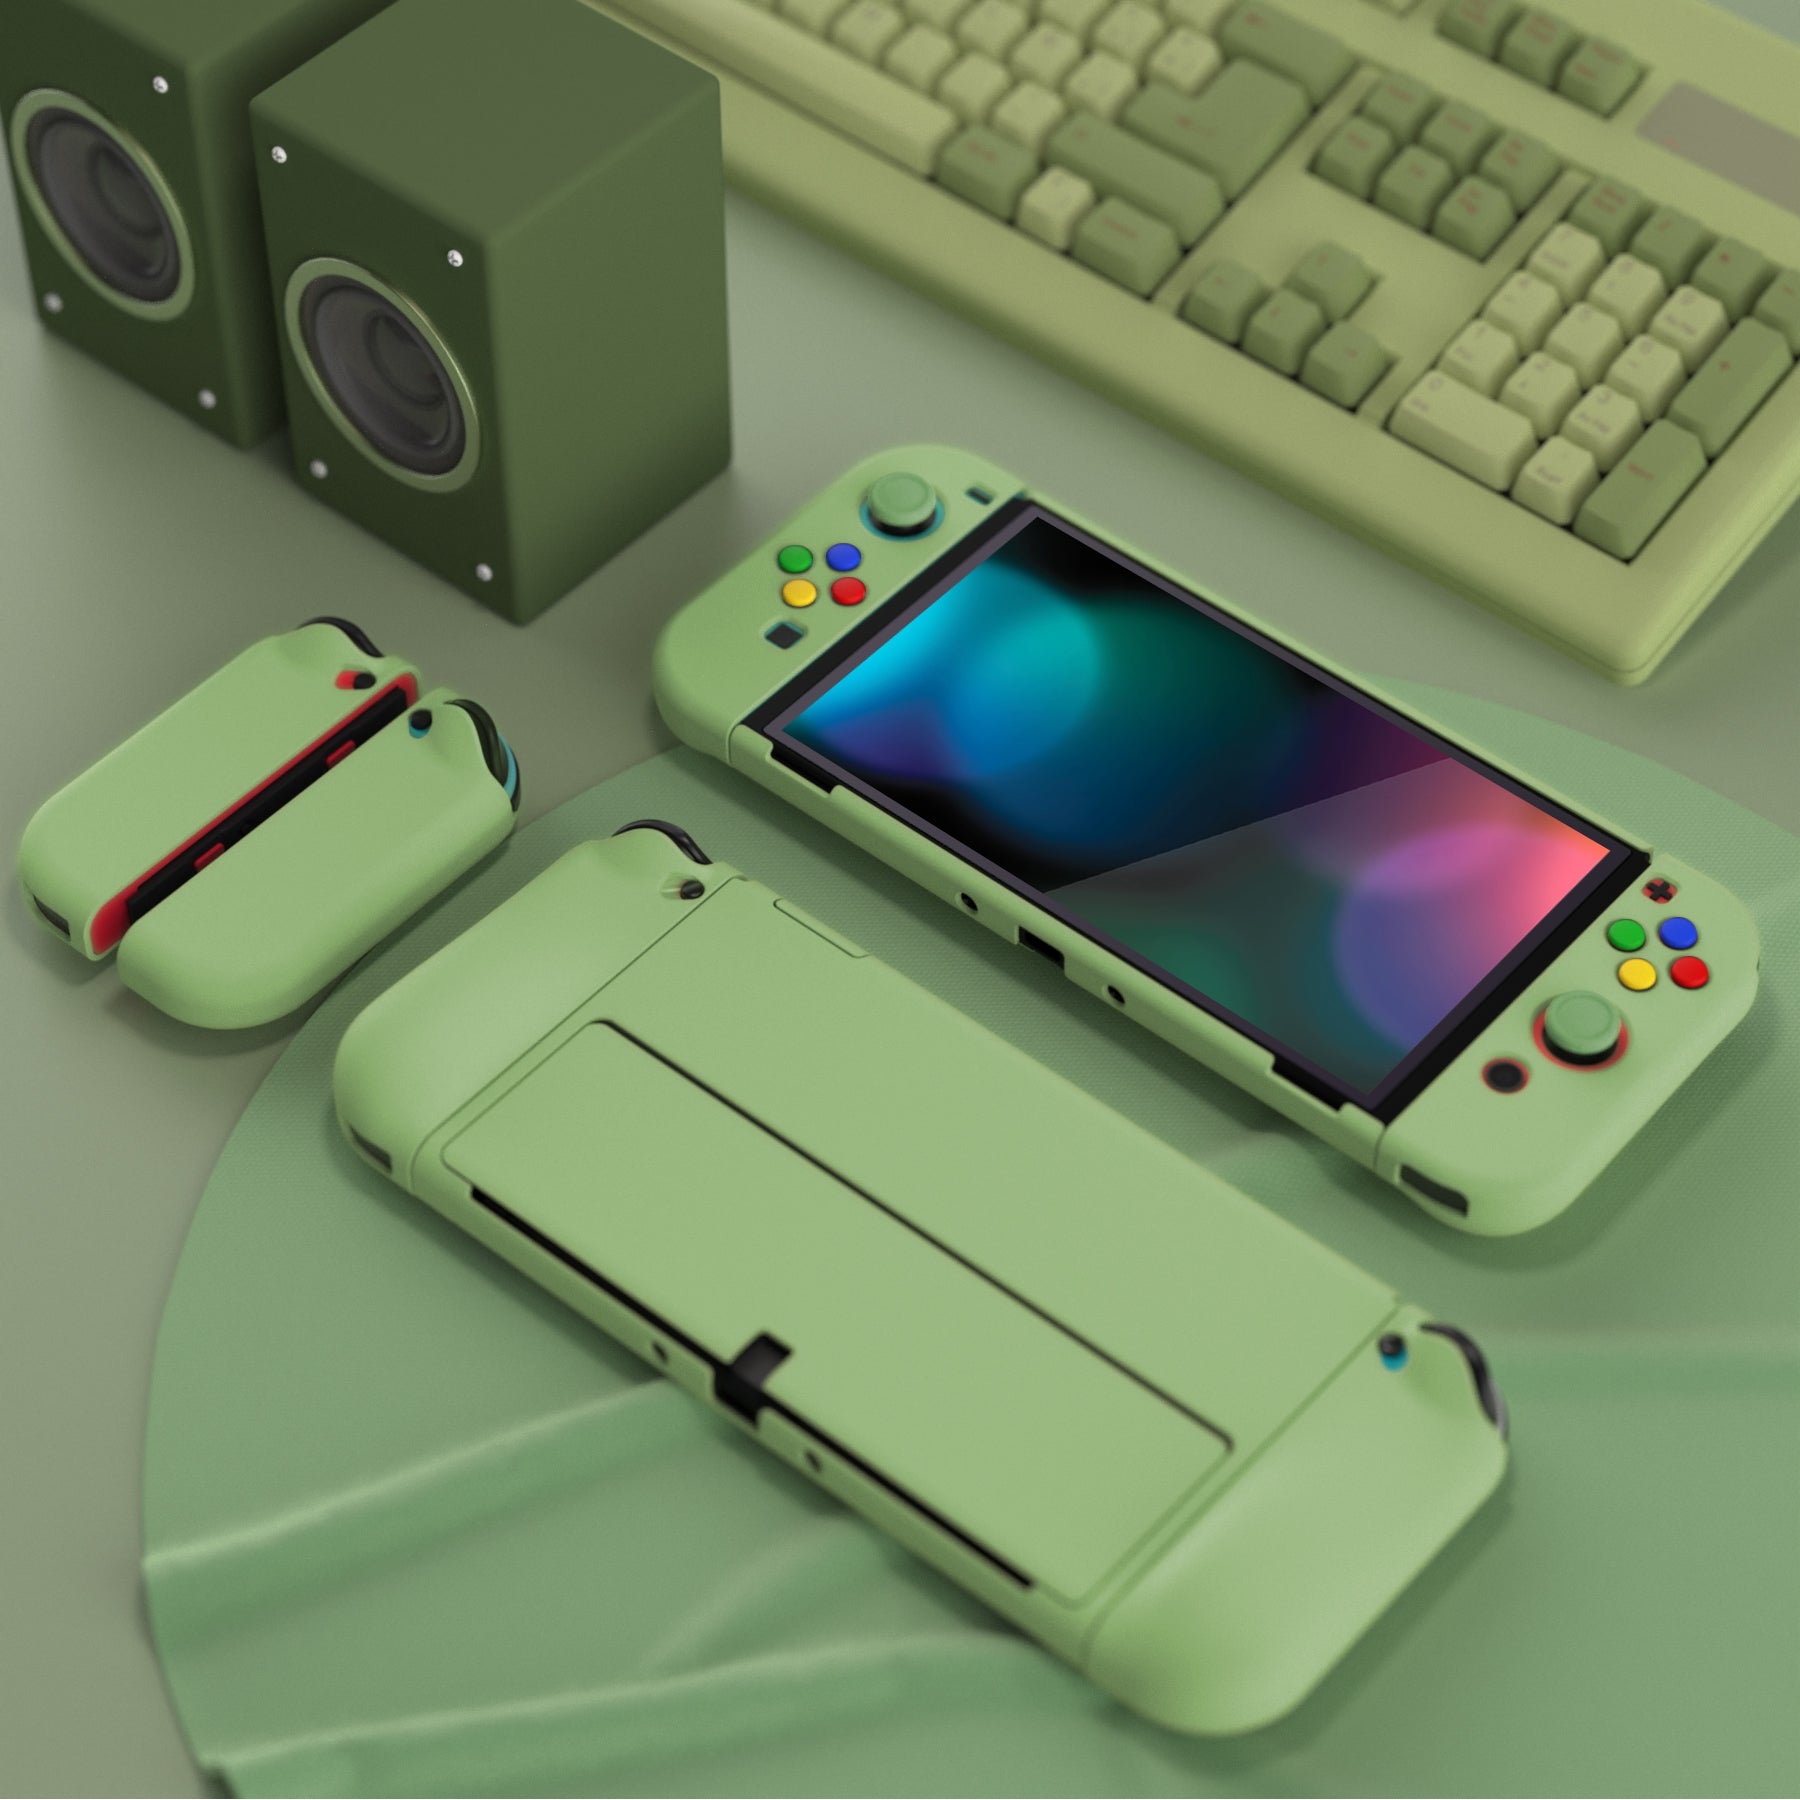 PlayVital AlterGrips Protective Slim Case for Nintendo Switch OLED, Ergonomic Grip Cover for Joycon, Dockable Hard Shell for Switch OLED with Thumb Grip Caps & Button Caps - Matcha Green - JSOYP3005 playvital